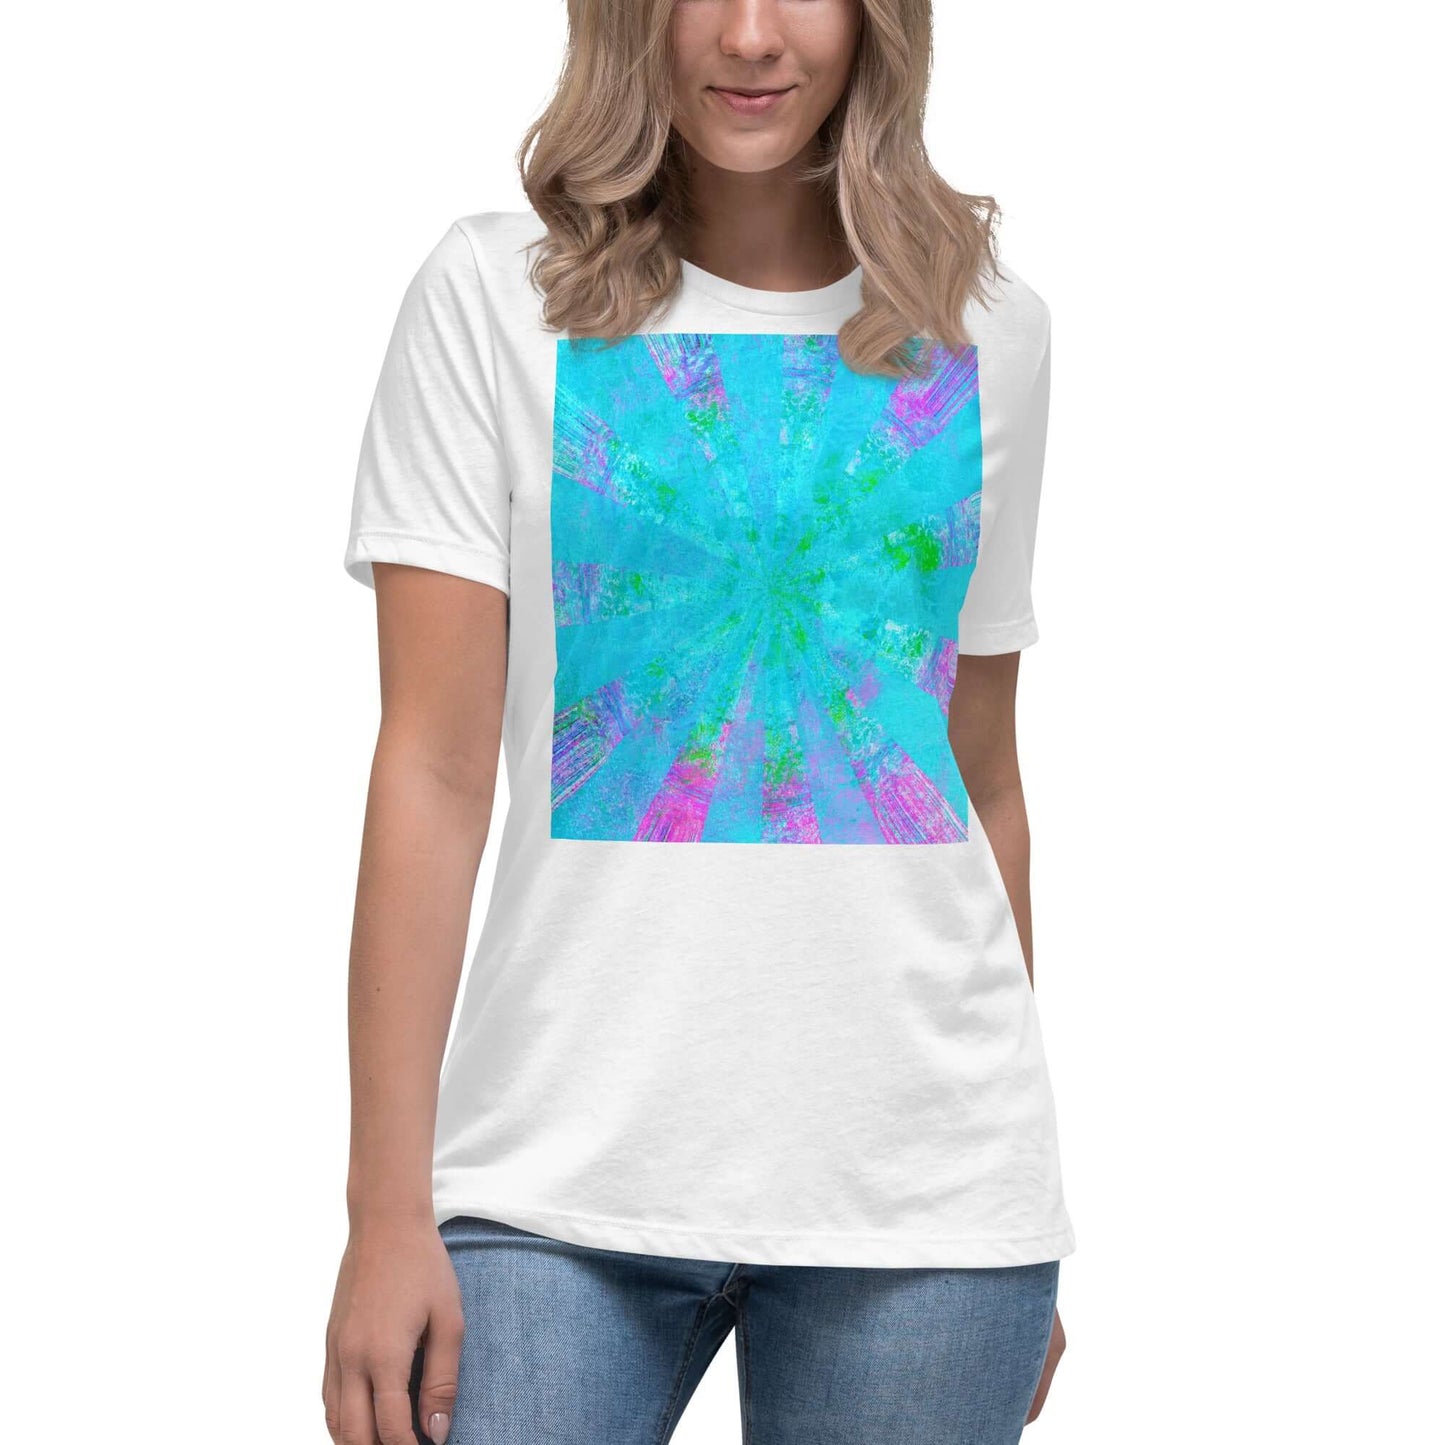 Turquoise Blue with Purple Radial Abstract Art “Blue Stingray” Women’s Short Sleeve Tee in White